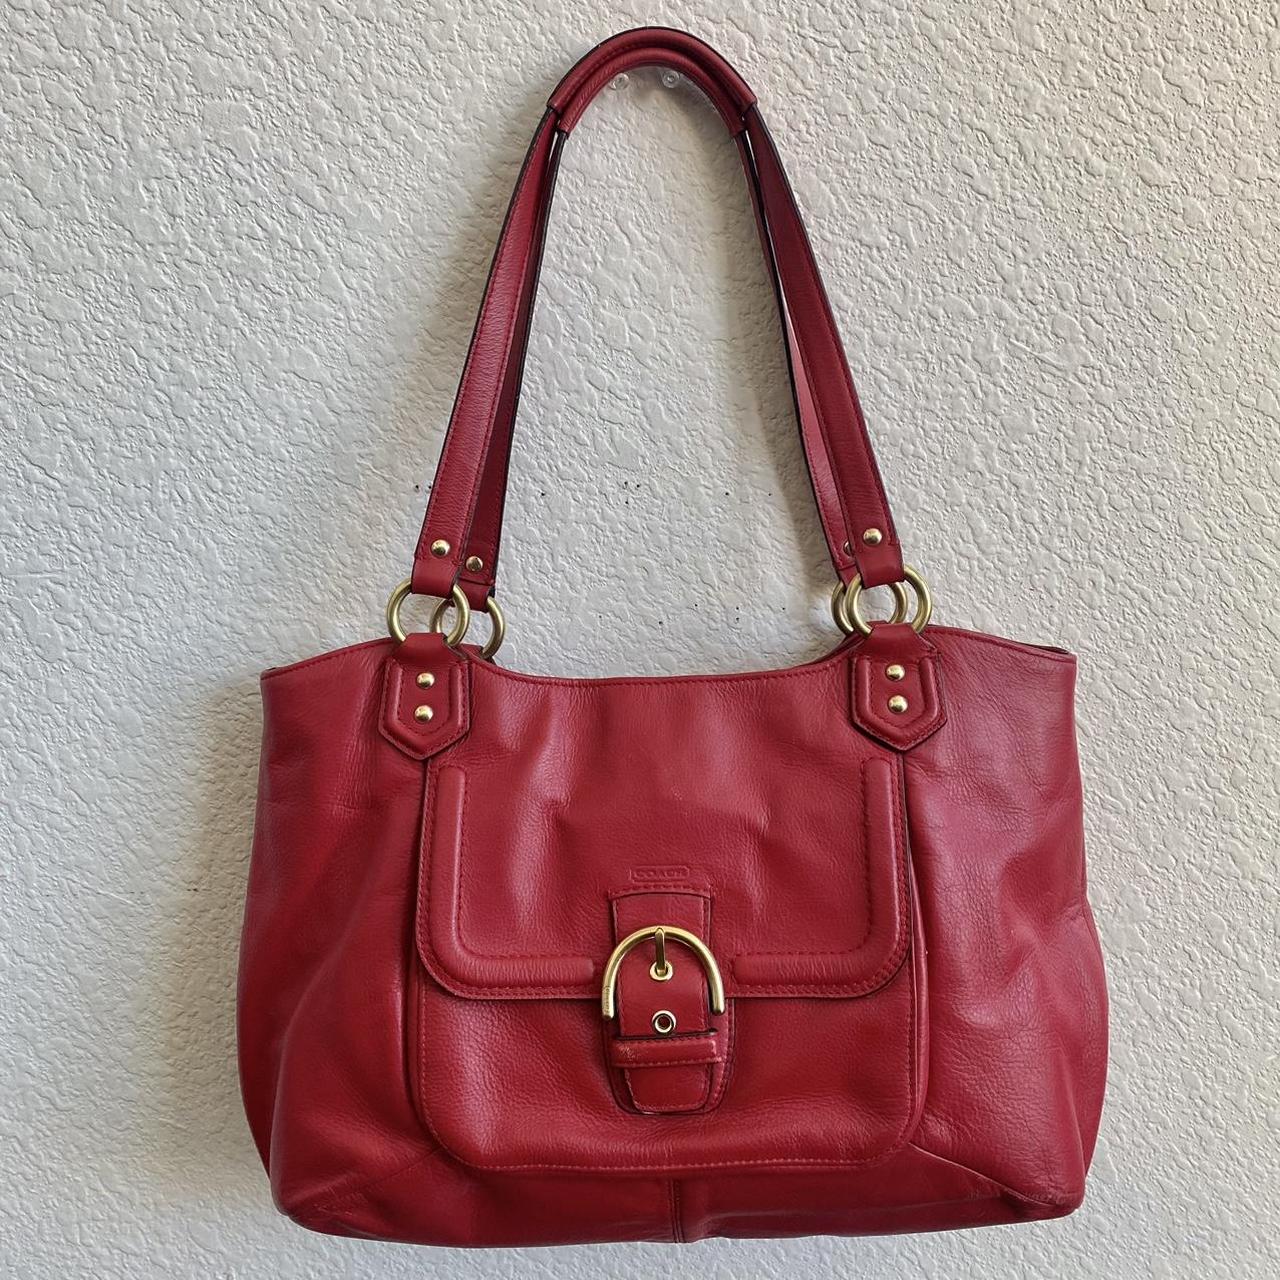 AUTHENTIC COACH RED LEATHER TOTE BAG WITH GOLD... - Depop